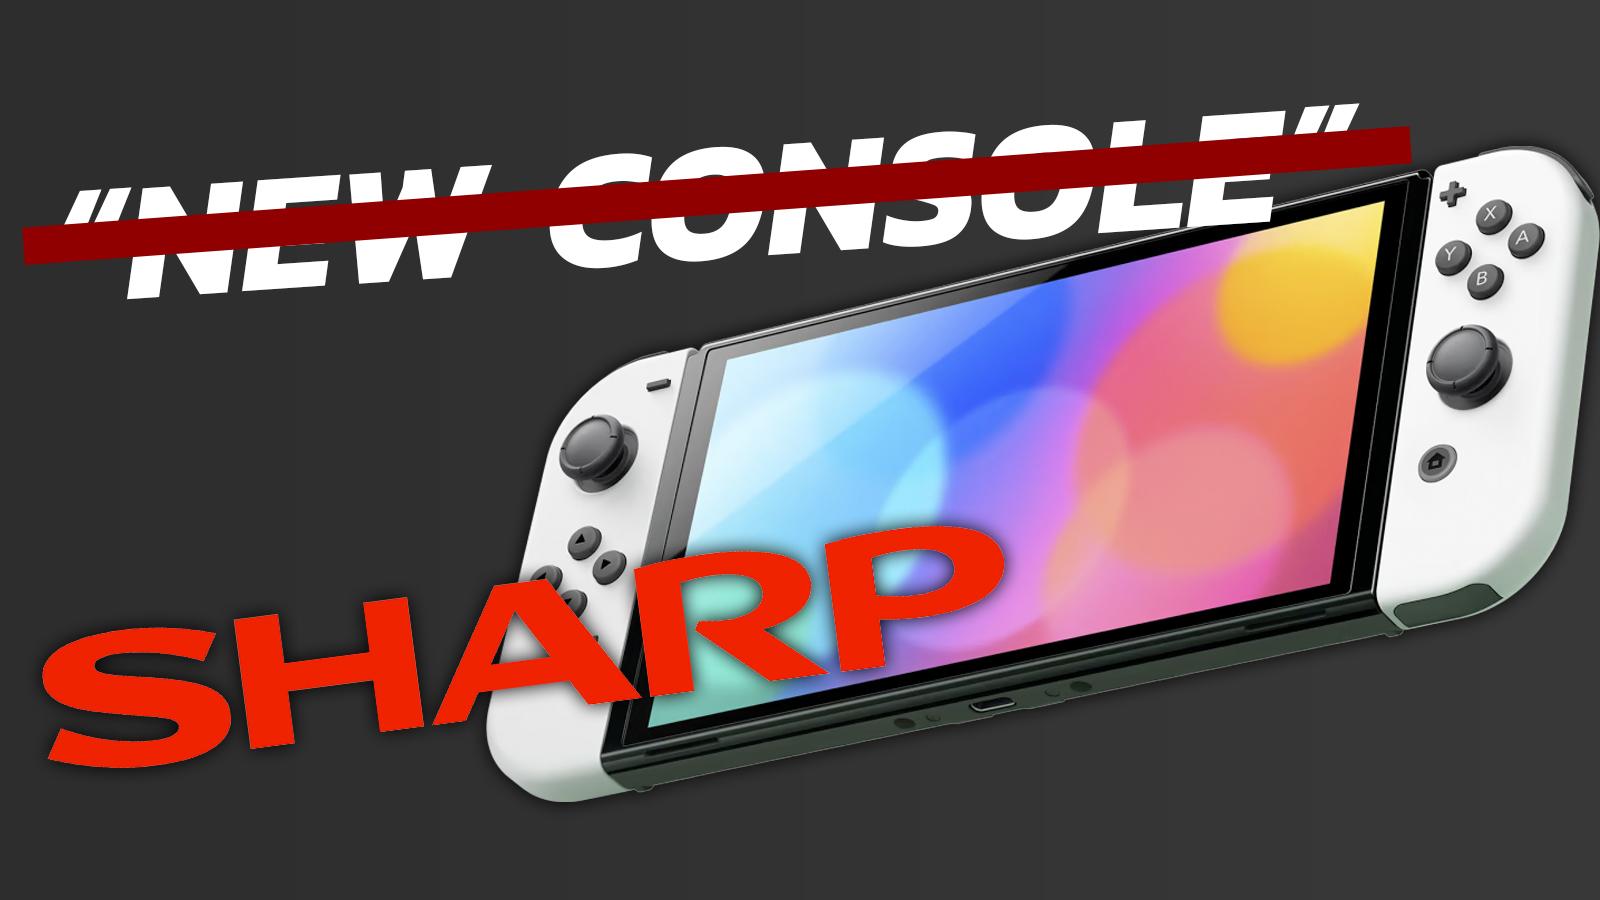 Sharp logo on an OLED switch with "new console" crossed out